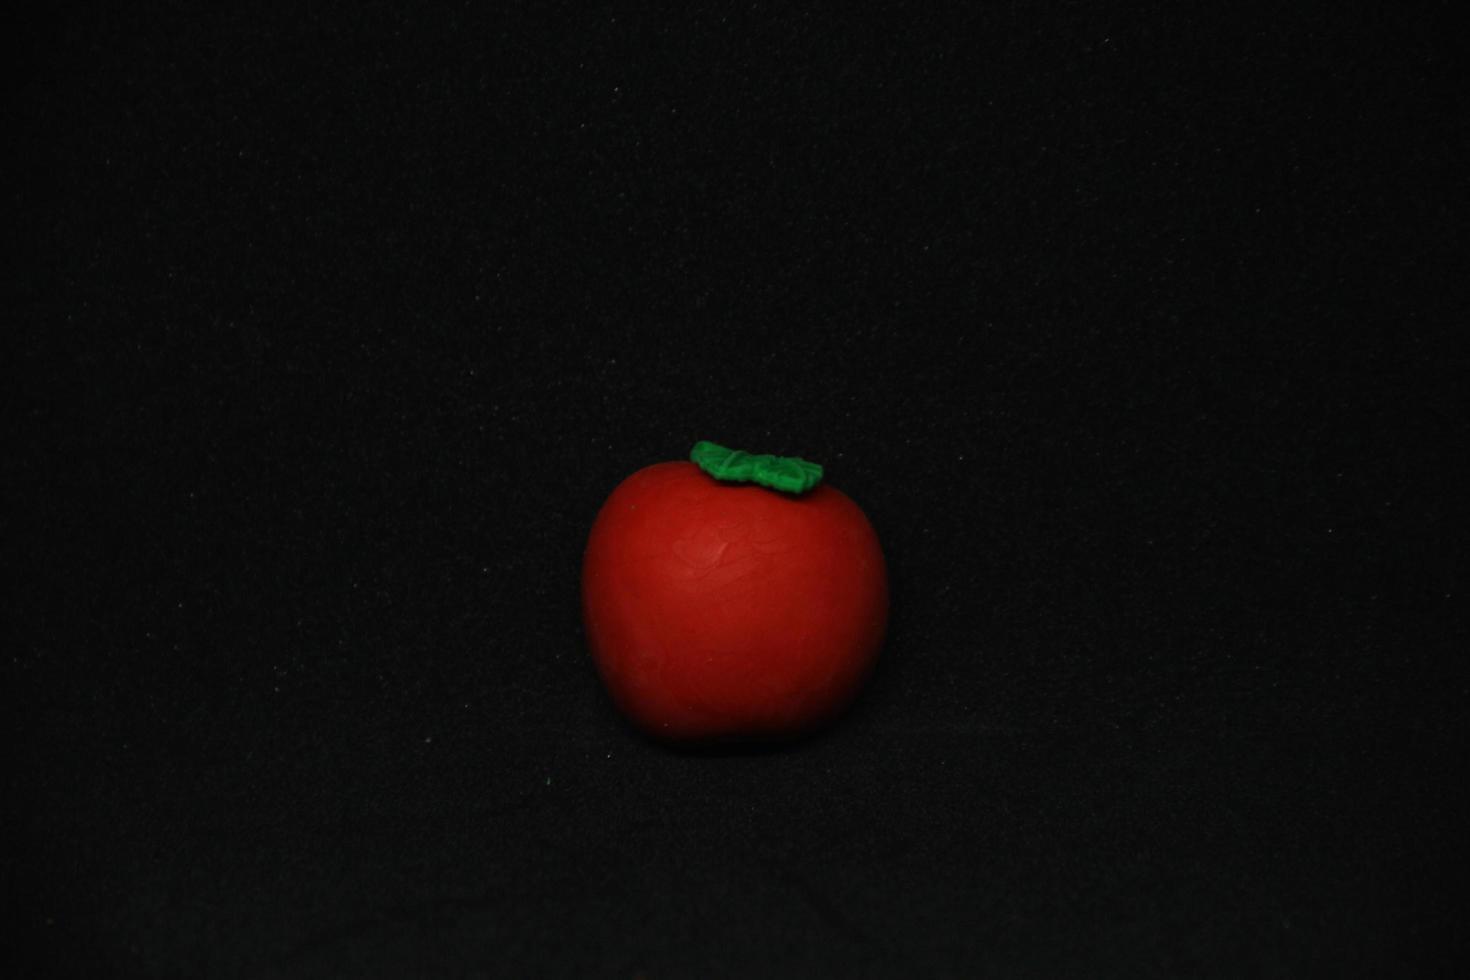 Round tomato shaped eraser stationary tools for office or school supplies. Isolated photo on plain dark black background.